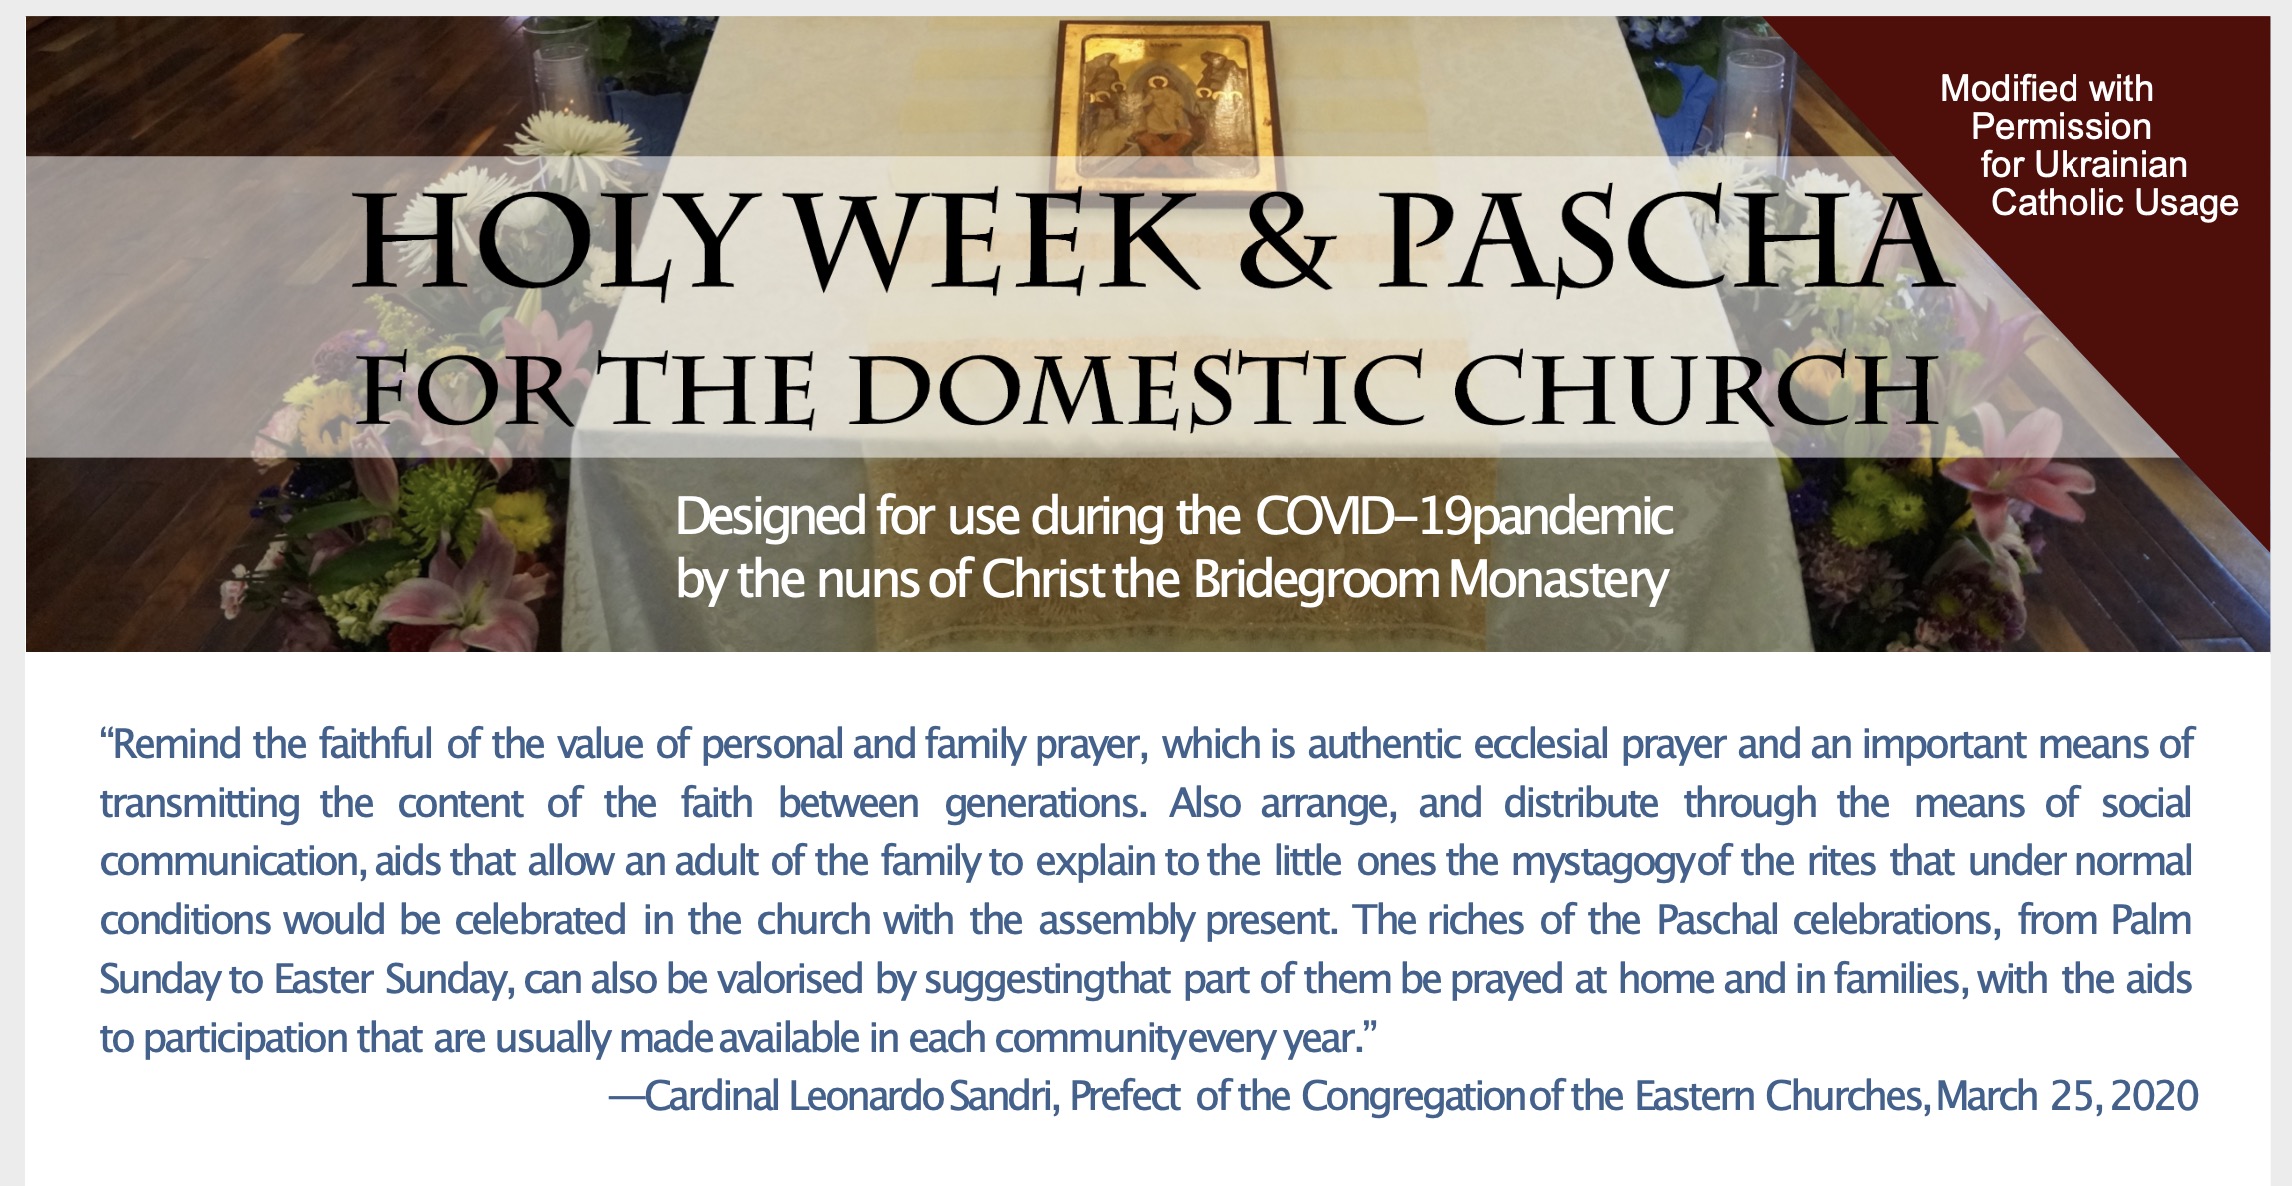 Domestic Church: Helpful Guide for Holy Week and Pascha (Easter)